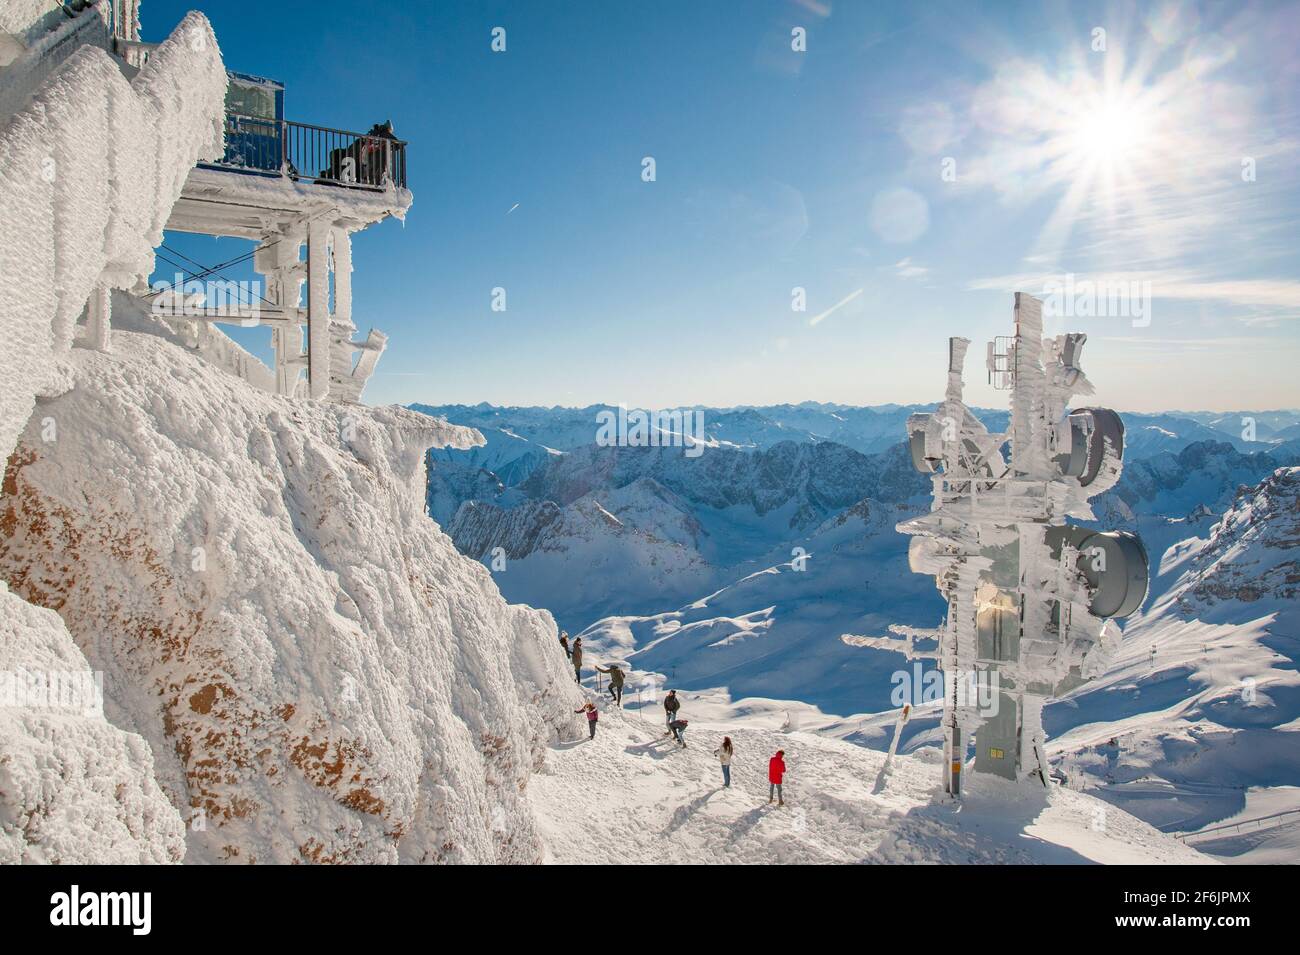 Zugspitze, Bavaria, Germany - December 29 2019: The Zugspitze, at 2,962 m above sea level, is the highest mountain in Germany. Stock Photo